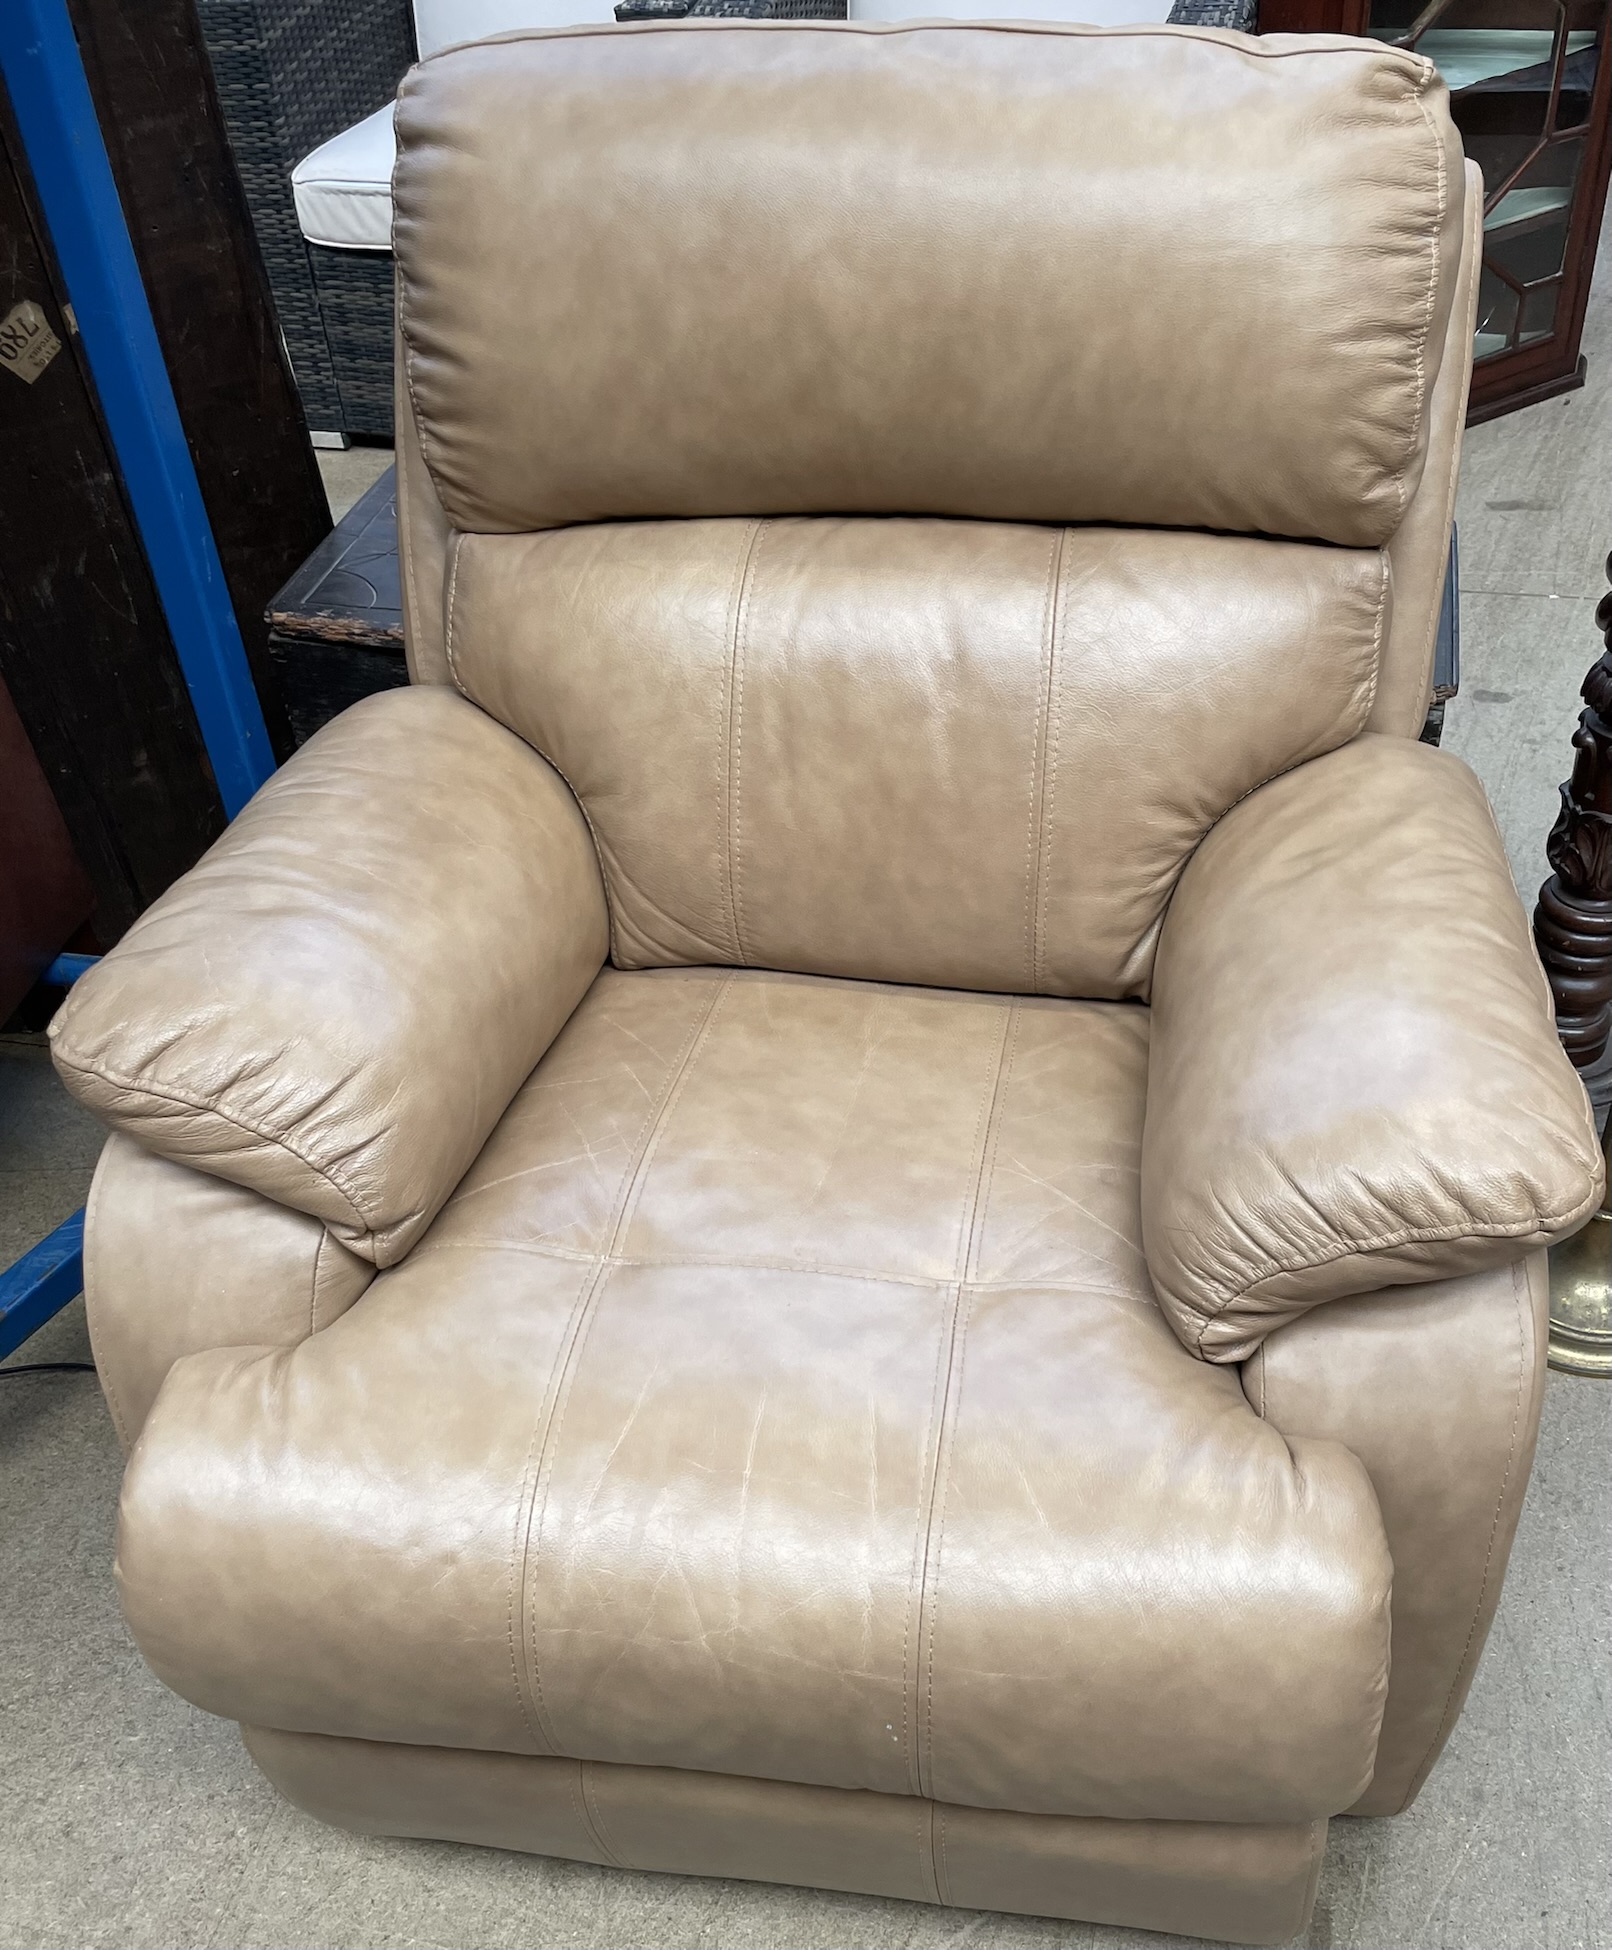 A light brown leather electric reclining chair (sold as seen,